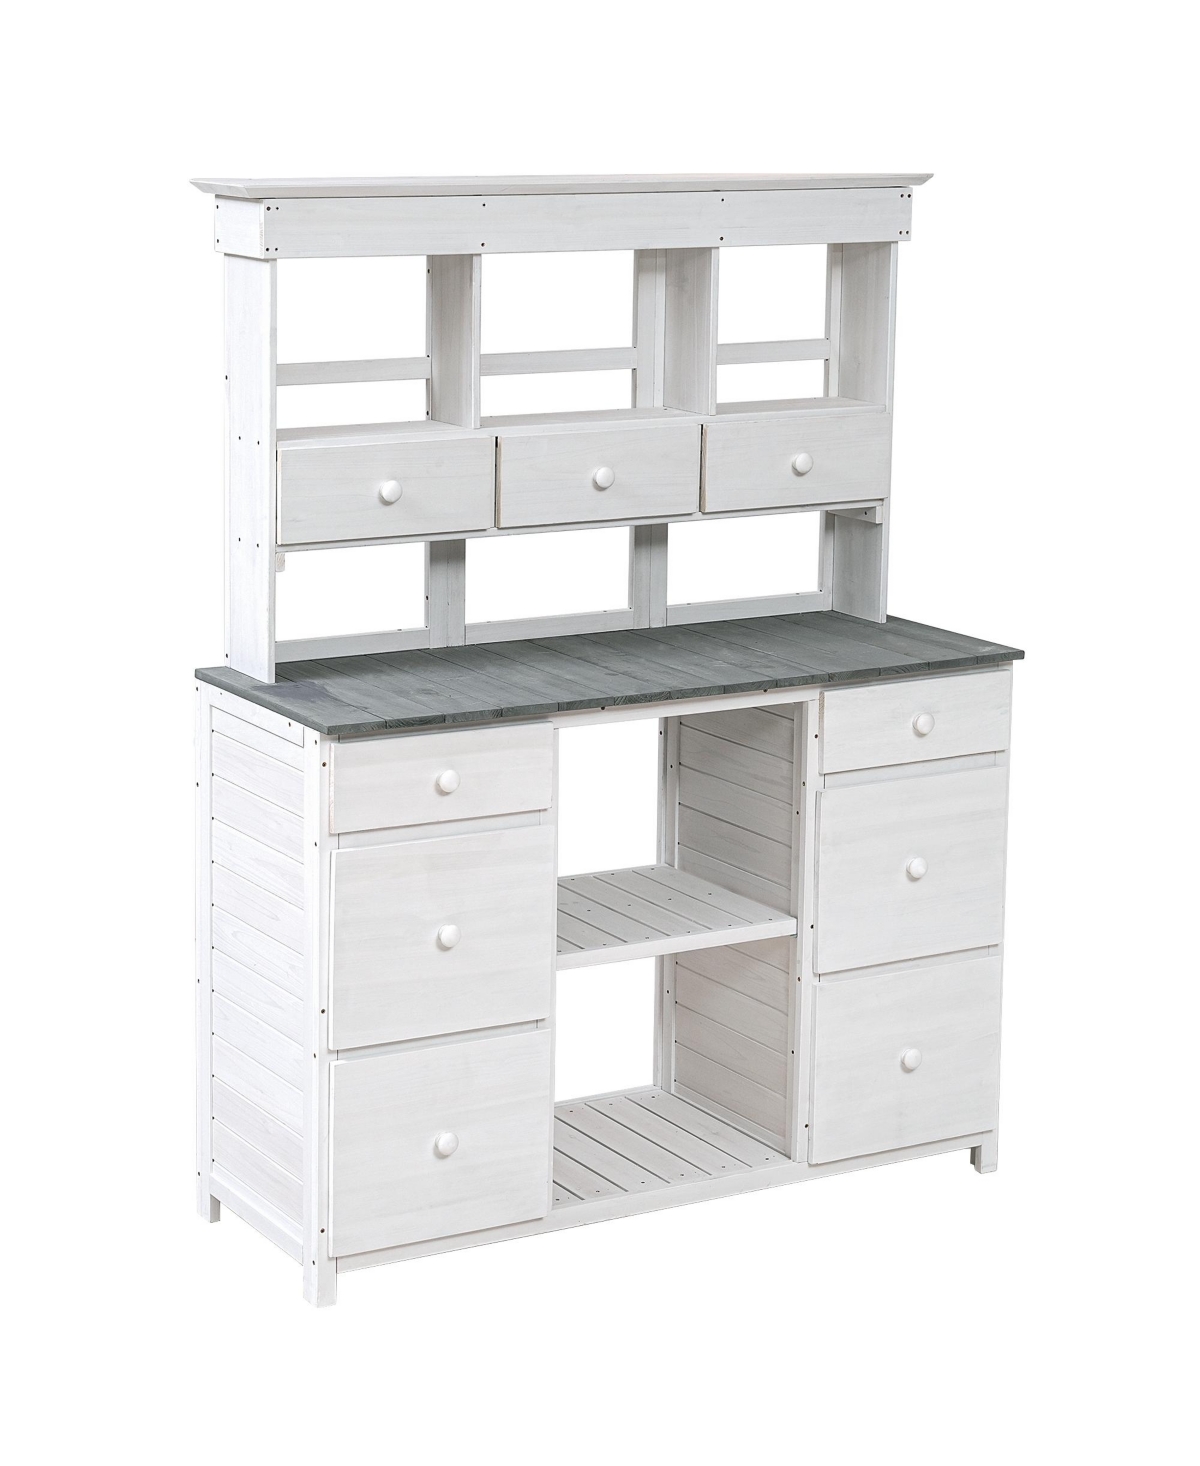 Garden Potting Bench Table, Rustic And Sleek Design With Multiple Drawers And Shelves For Storage - White